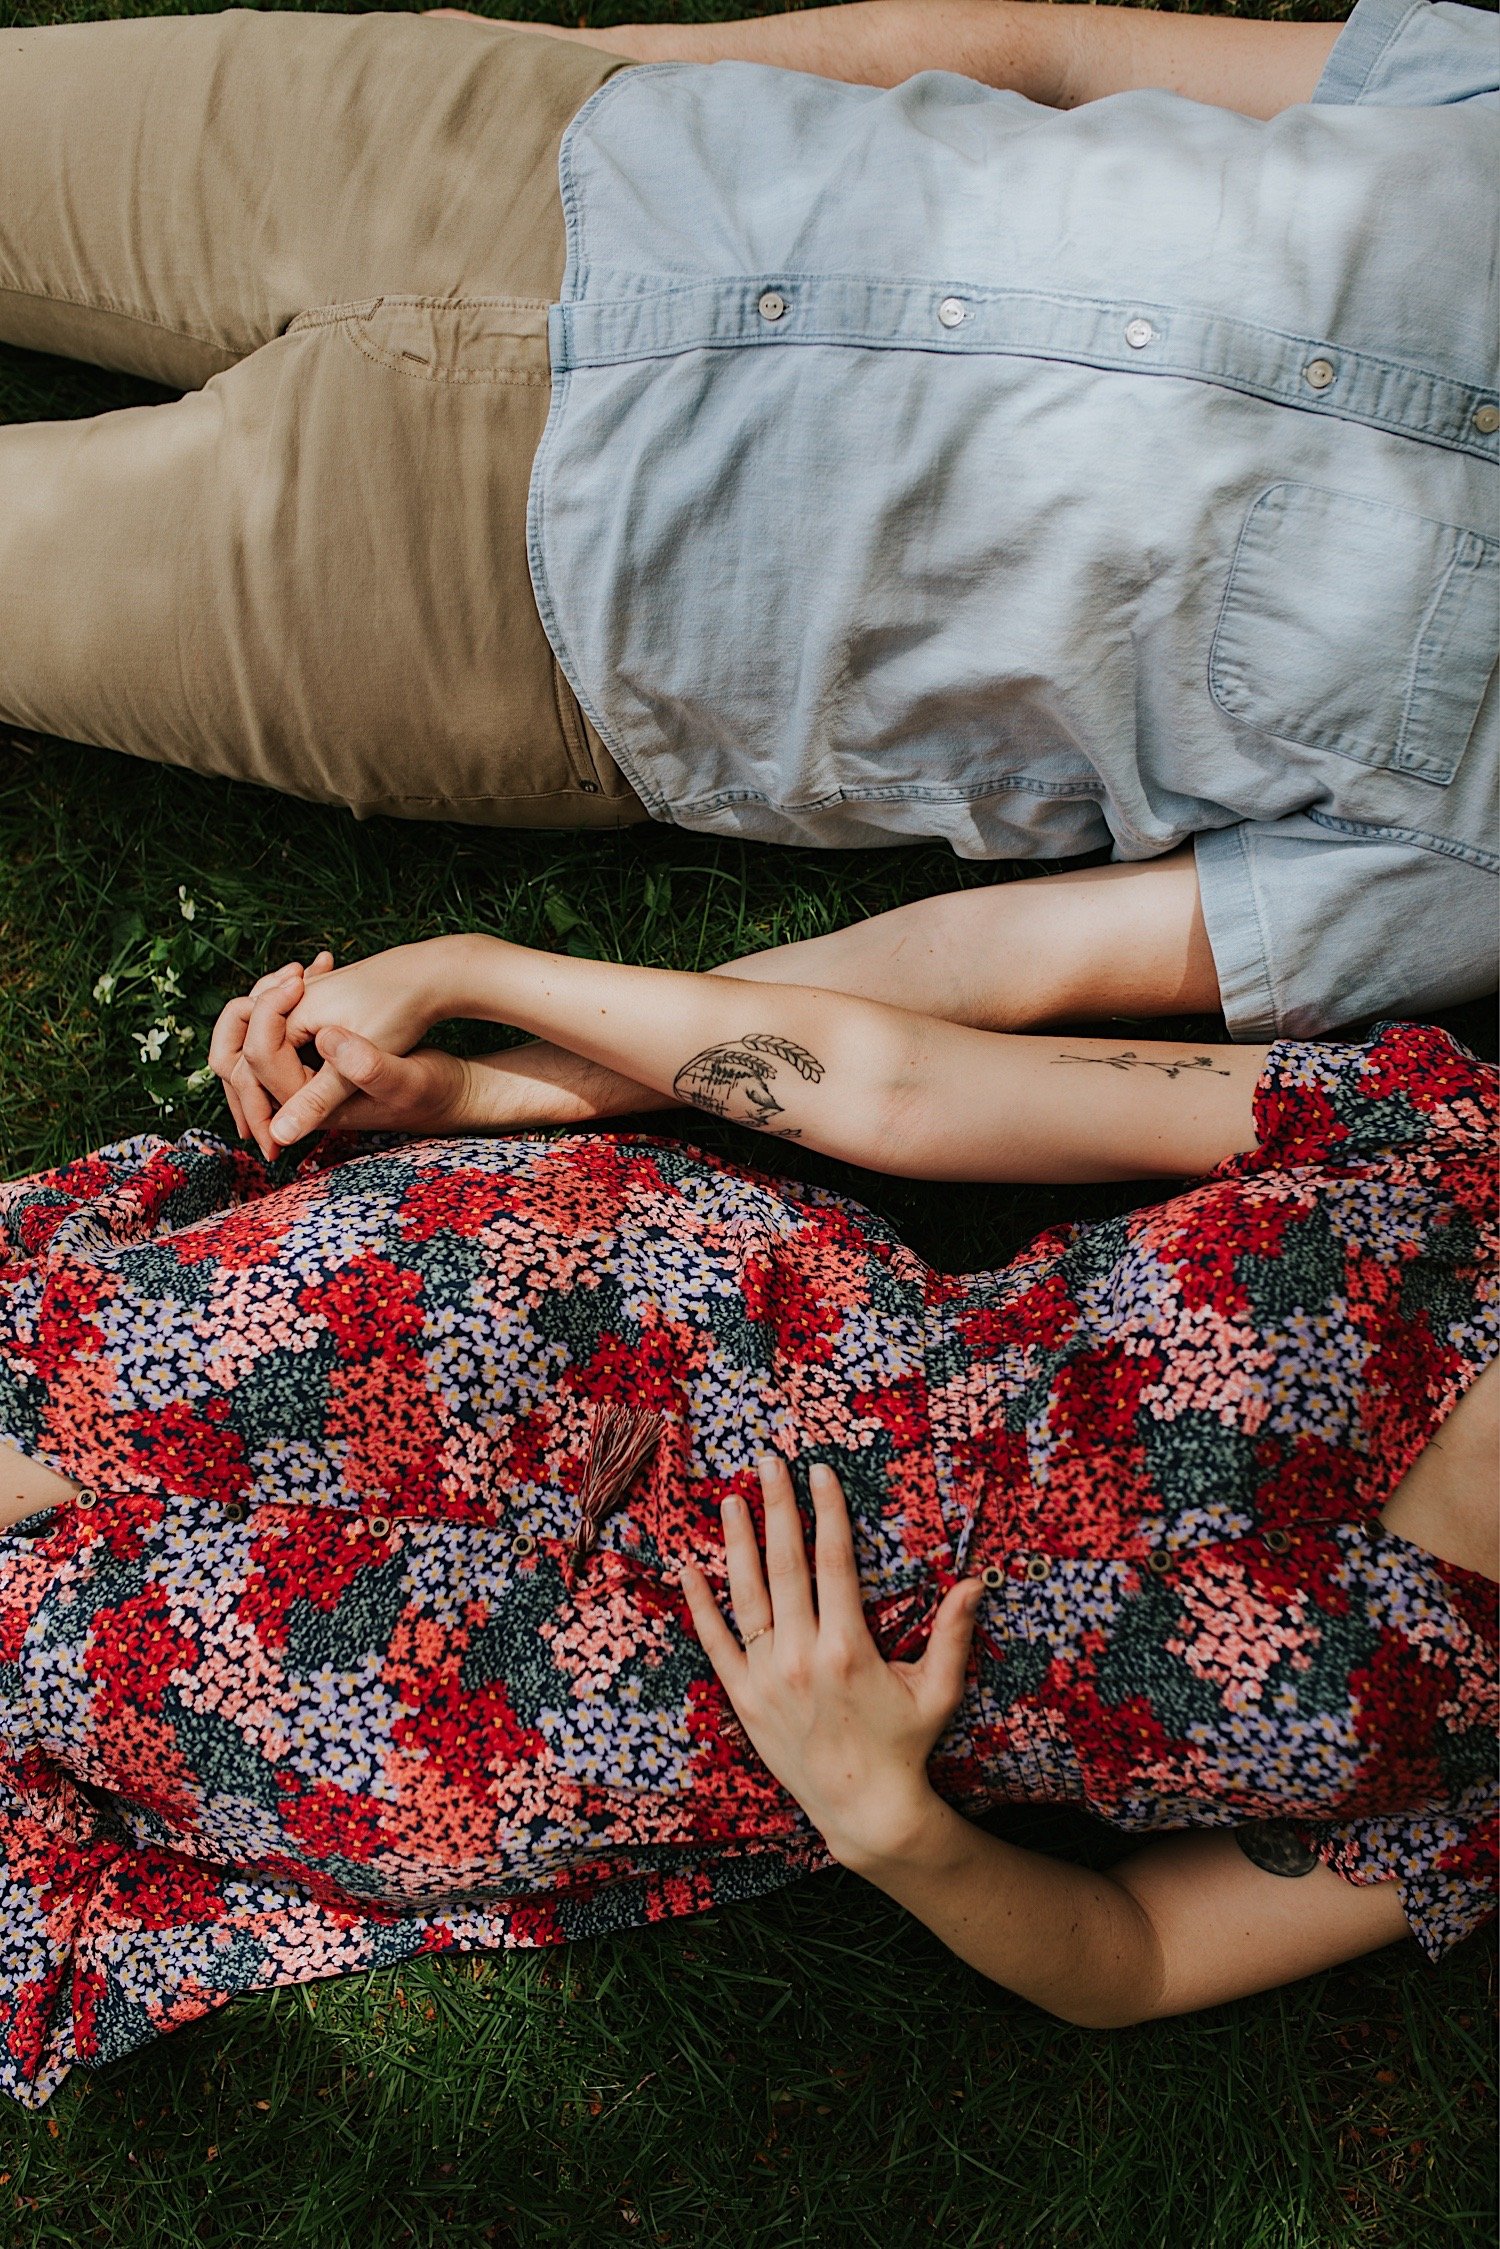 An engaged couple lays in the grass and holds hands during their engagement session.  The image is of their torsos and hands holding one another, showing off their spring time outfits